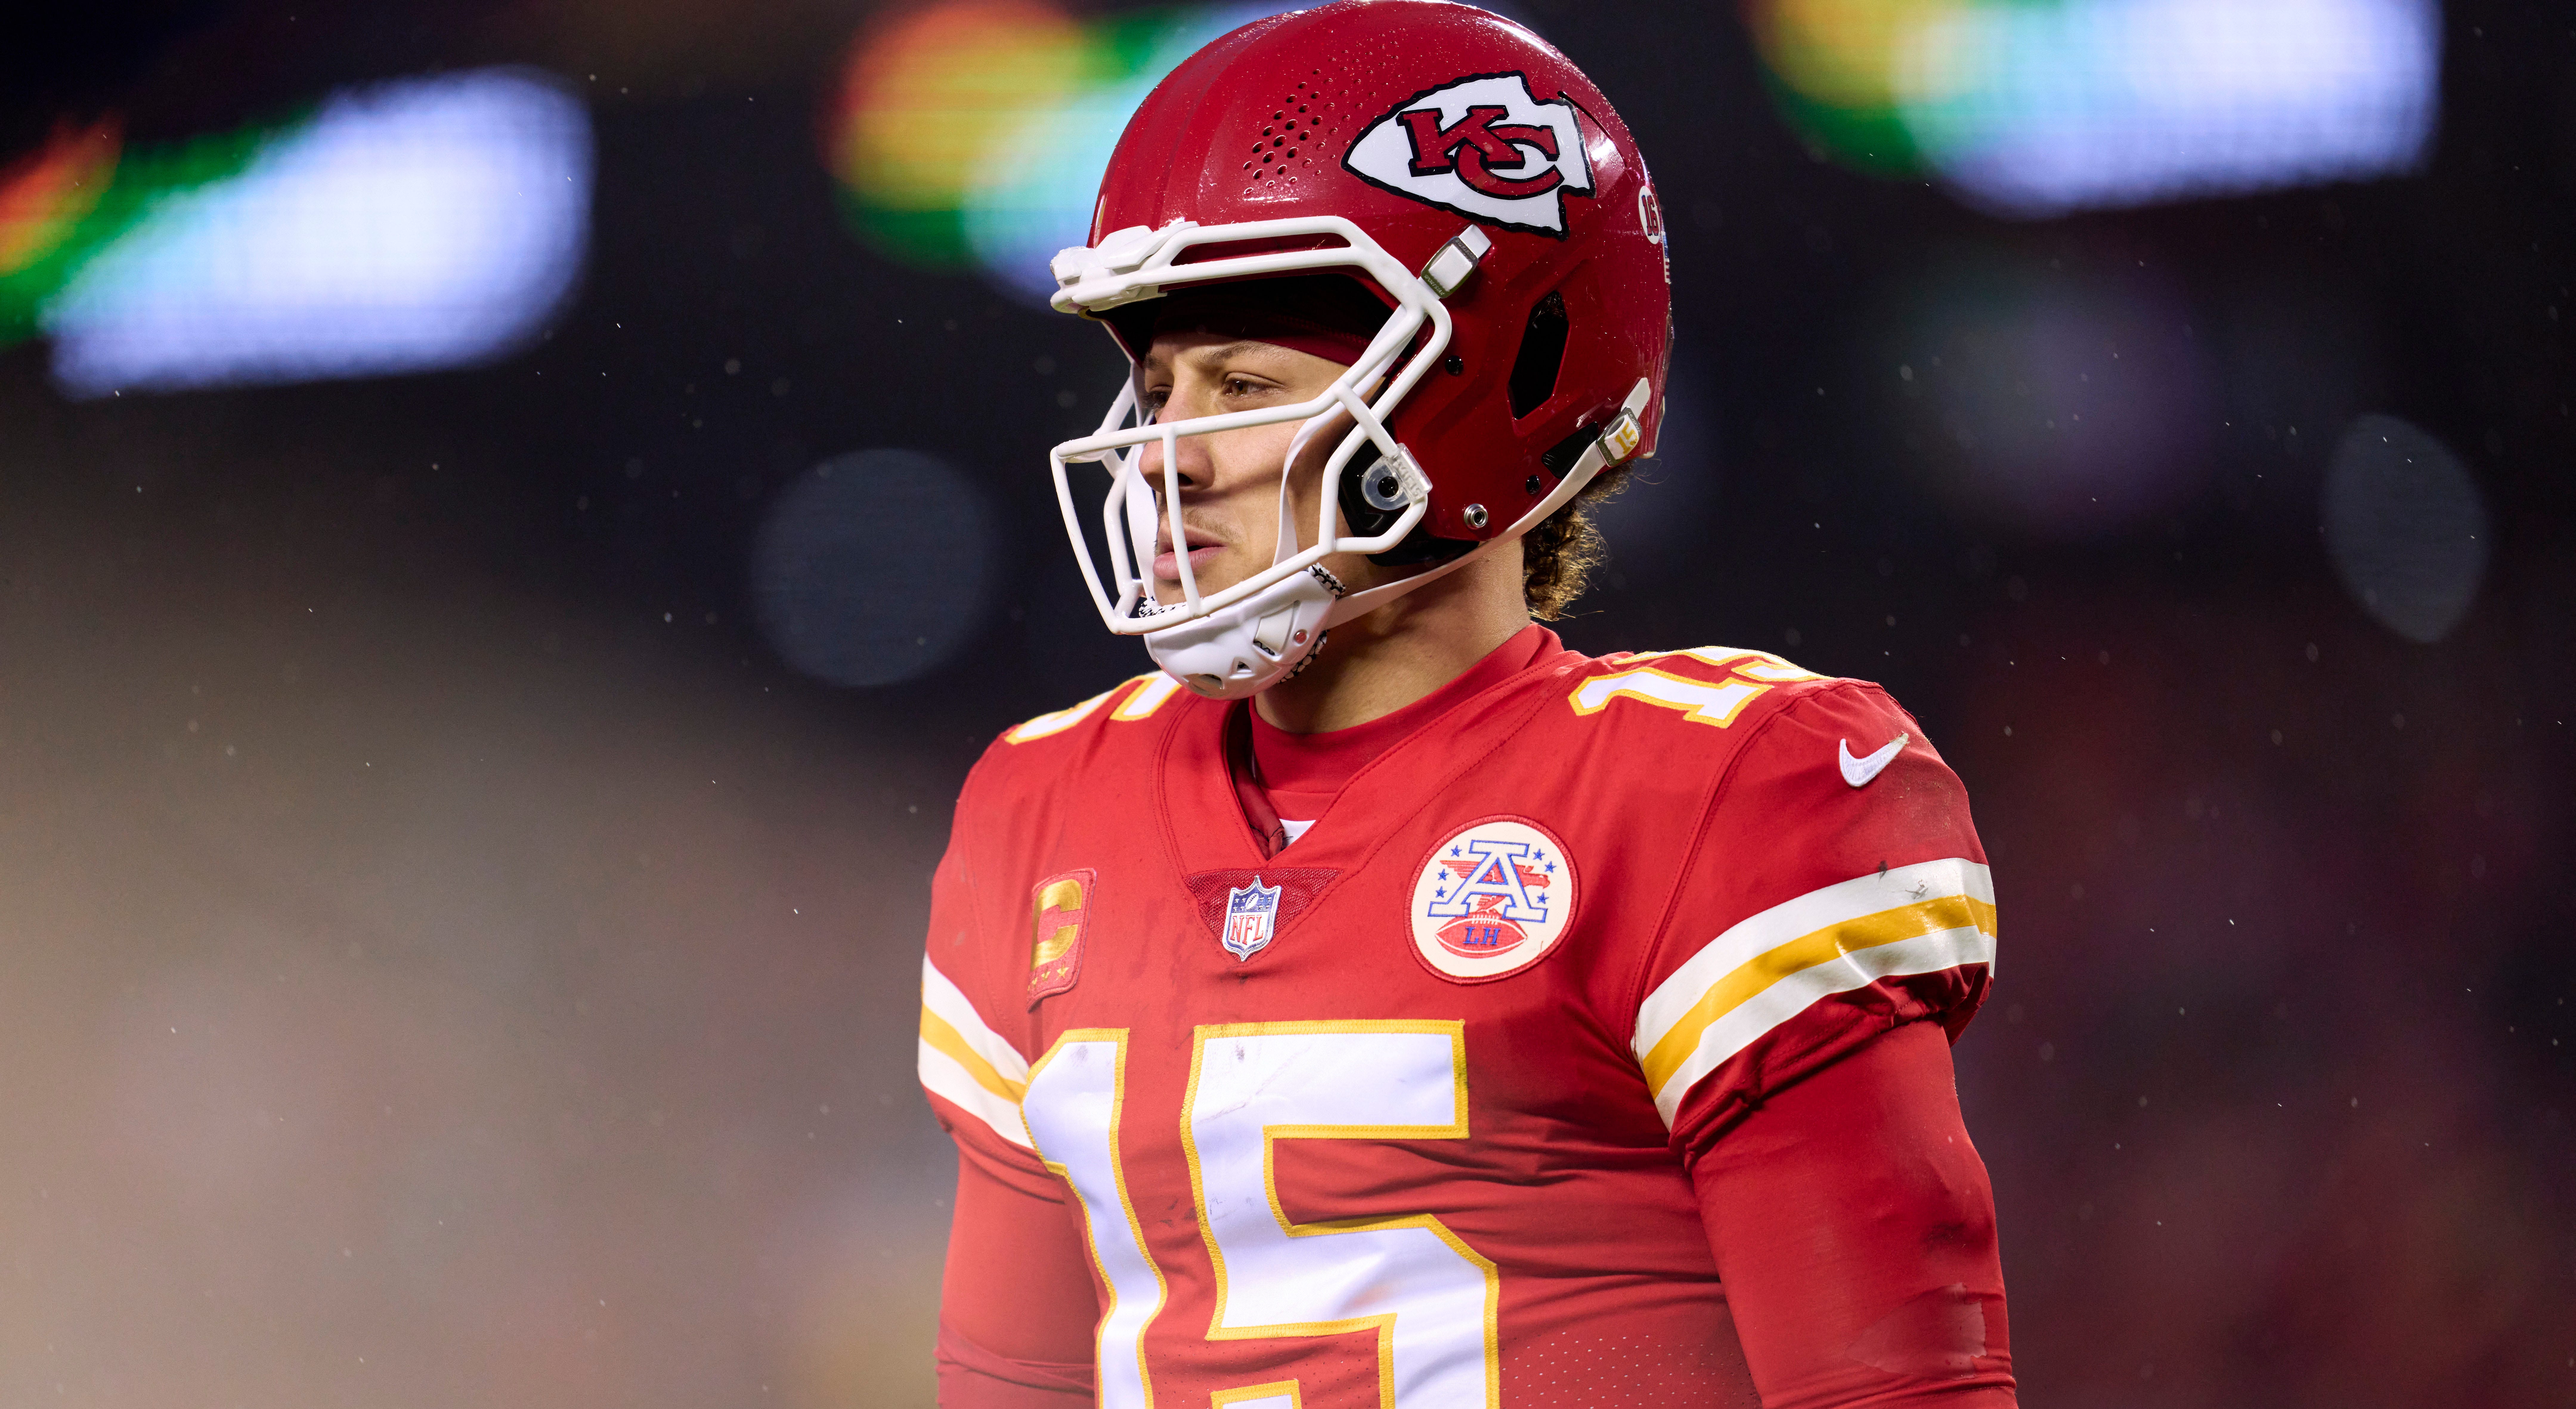 Chiefs’ Patrick Mahomes diagnosed with high-ankle sprain after playoff win: reports